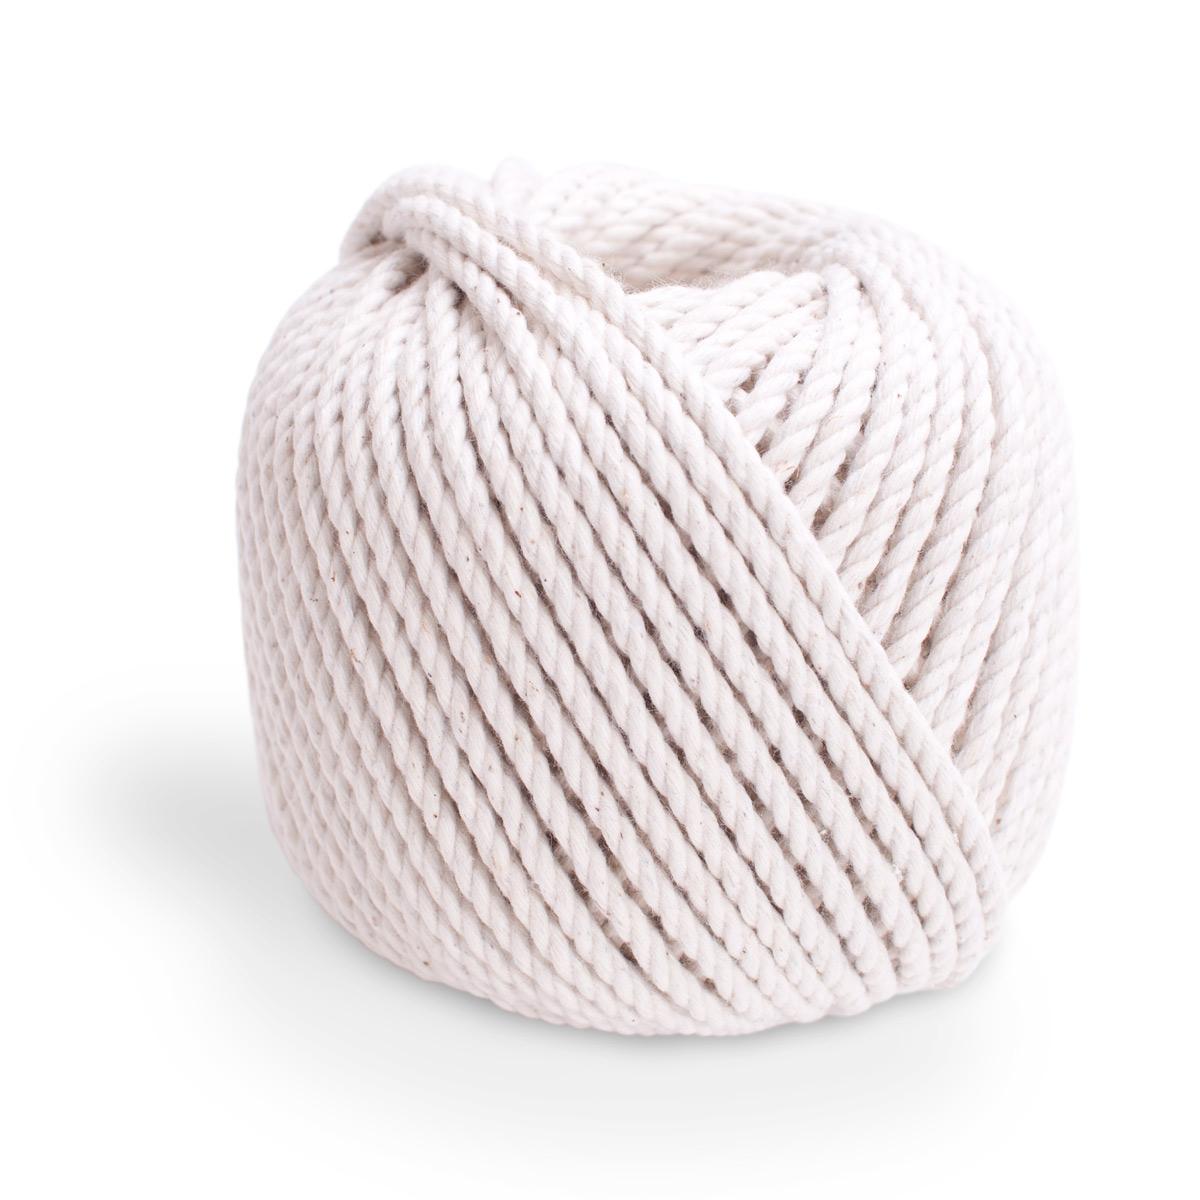 Ball of 7/64 Cotton Twine - 1Lb #72 3-Strand. — Knot & Rope Supply